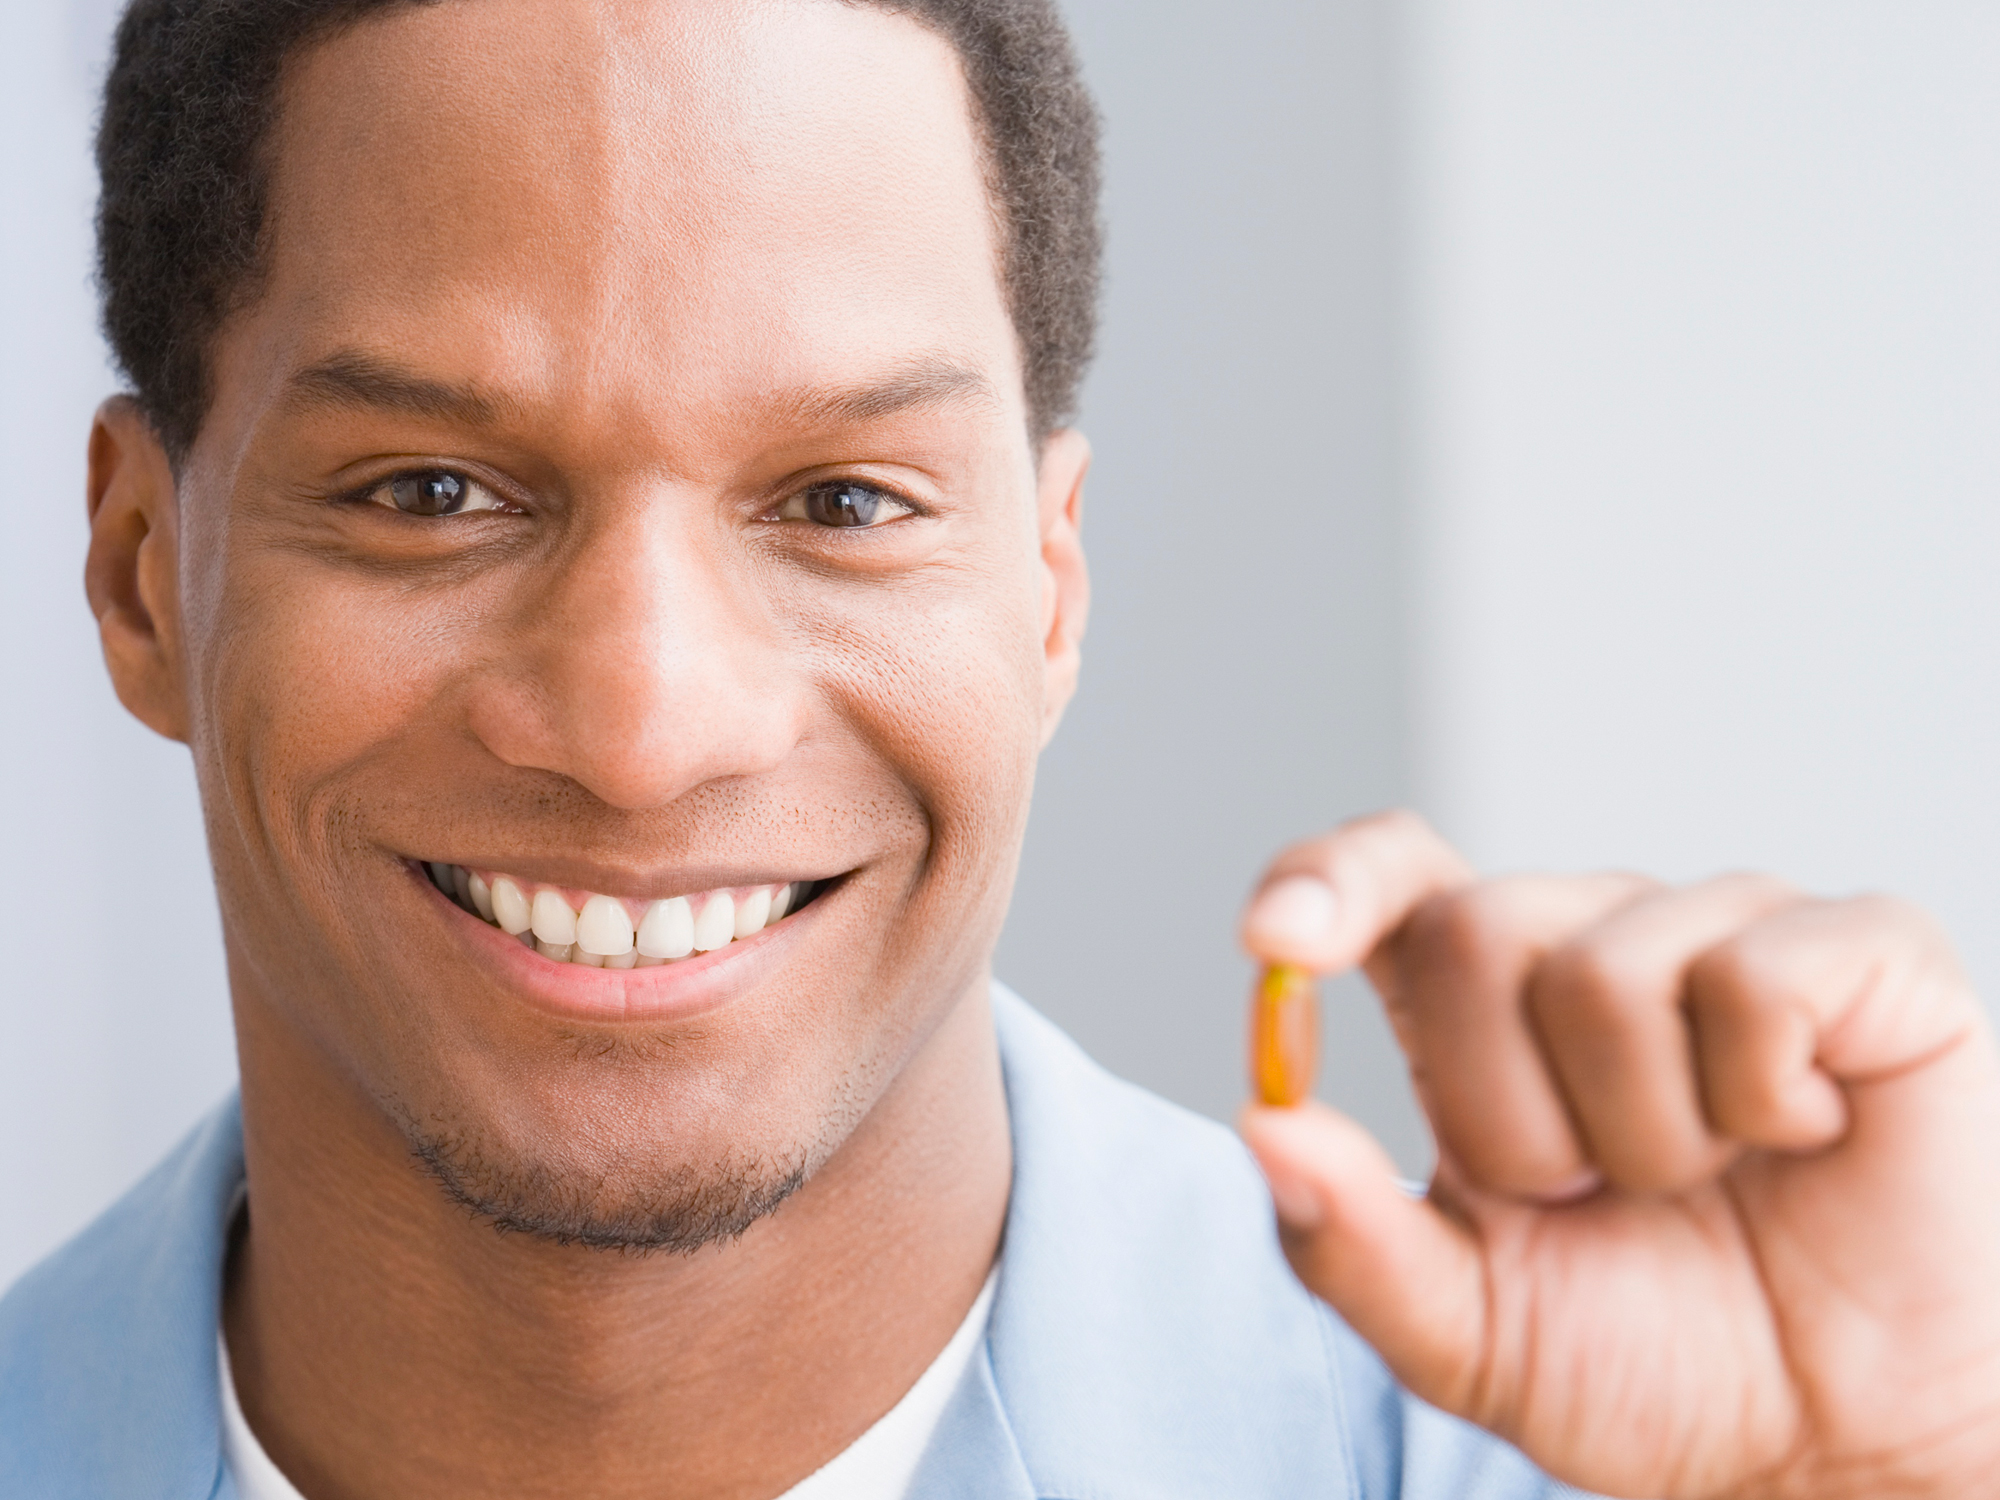 The #1 supplement every man should take